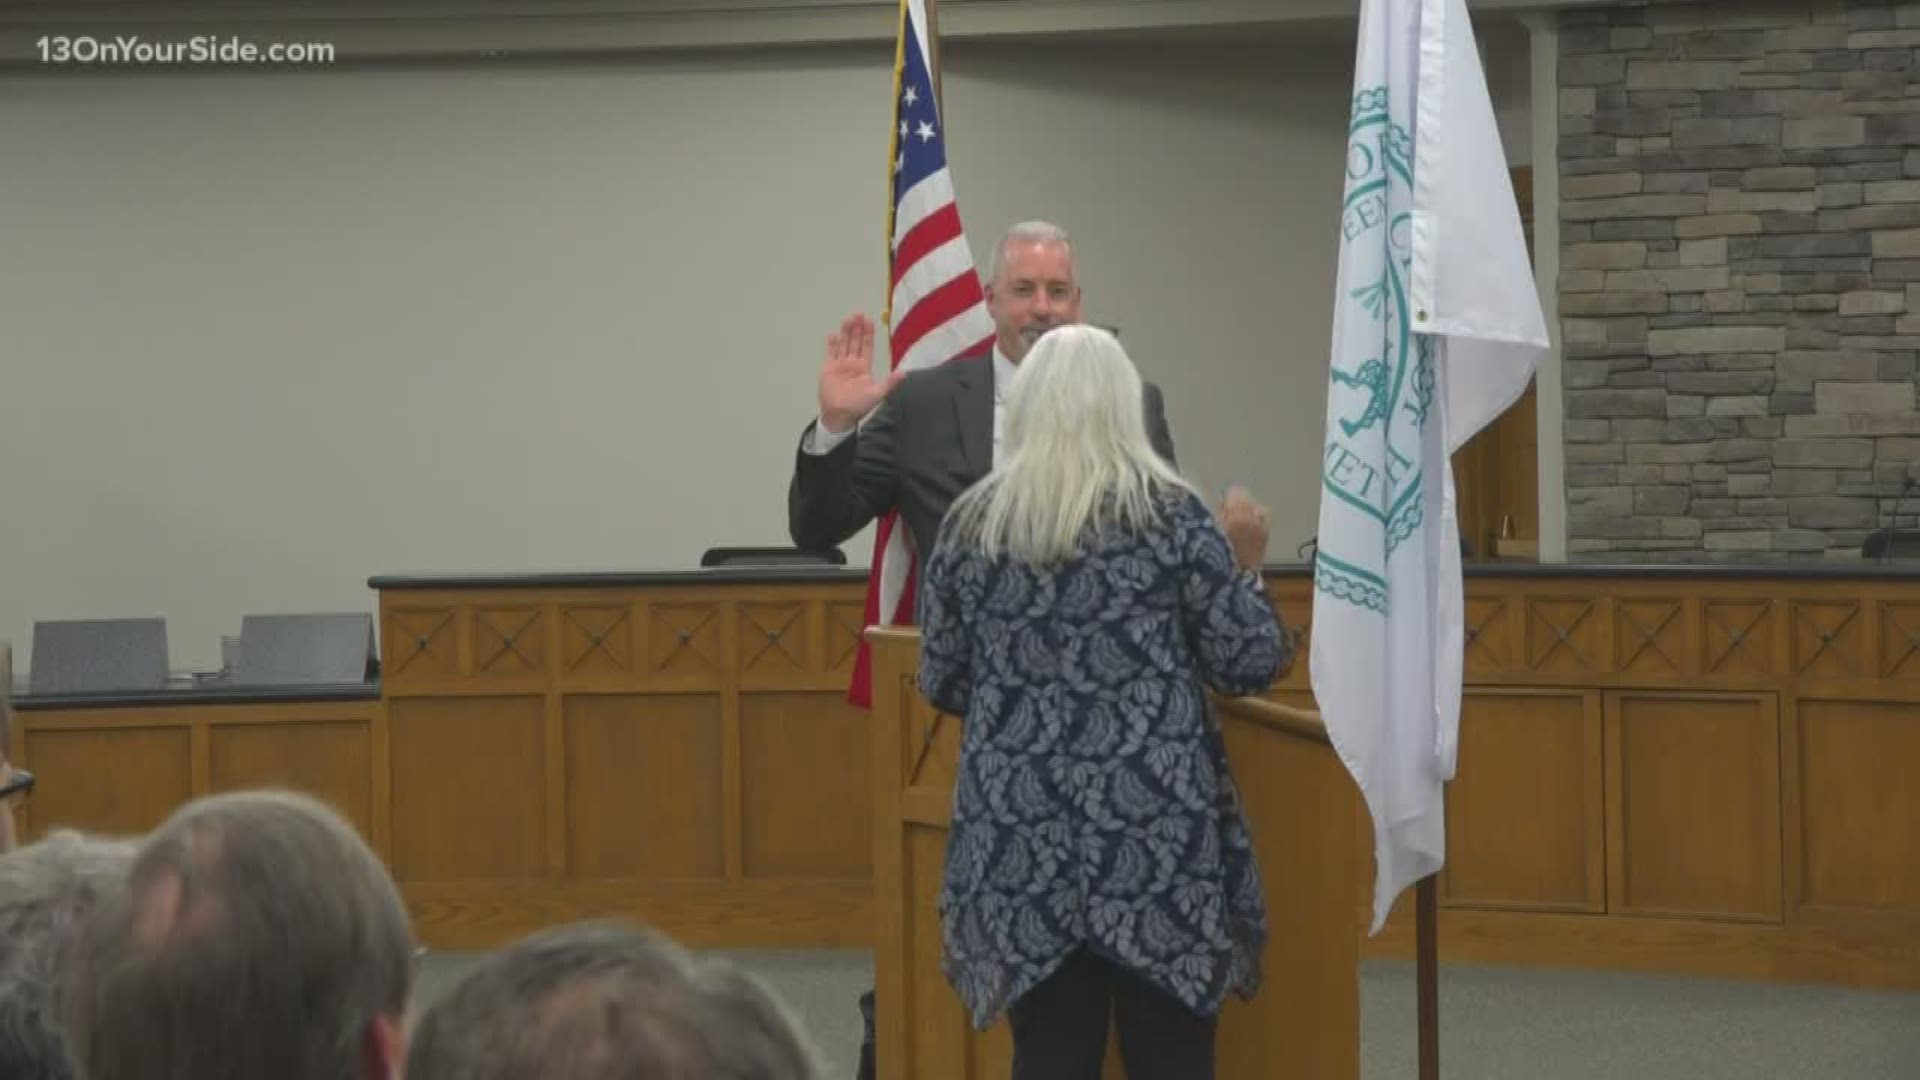 Nathan Bocks, the new mayor of Holland, was sworn in on Monday, Nov. 11.